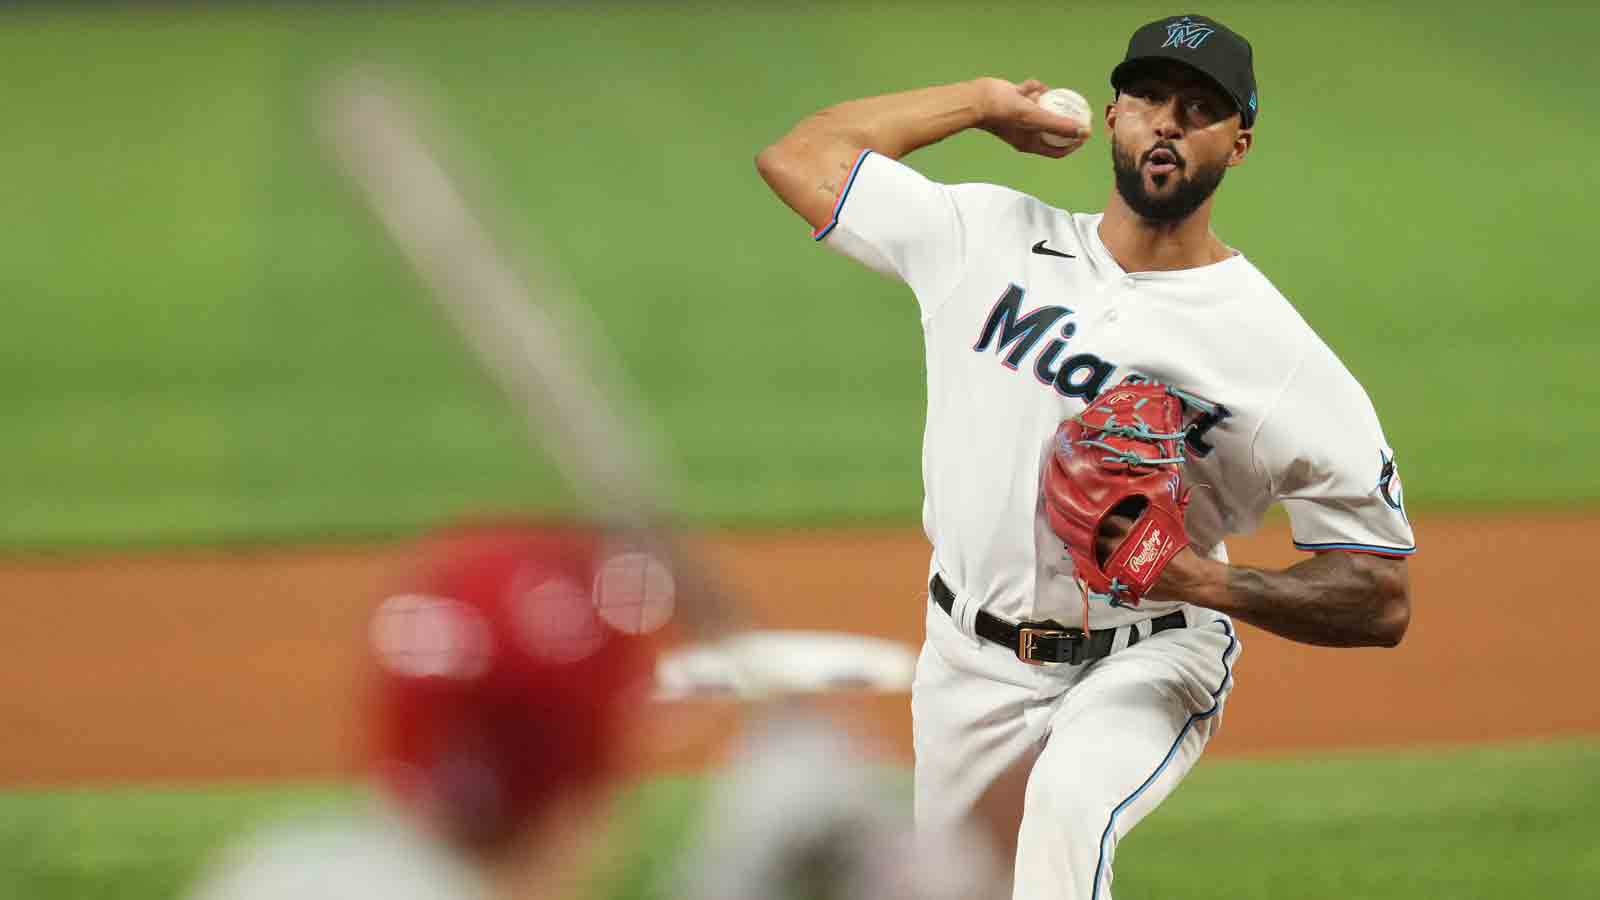 MLB Player Rankings for the Top 25 Starting Pitchers of 2021